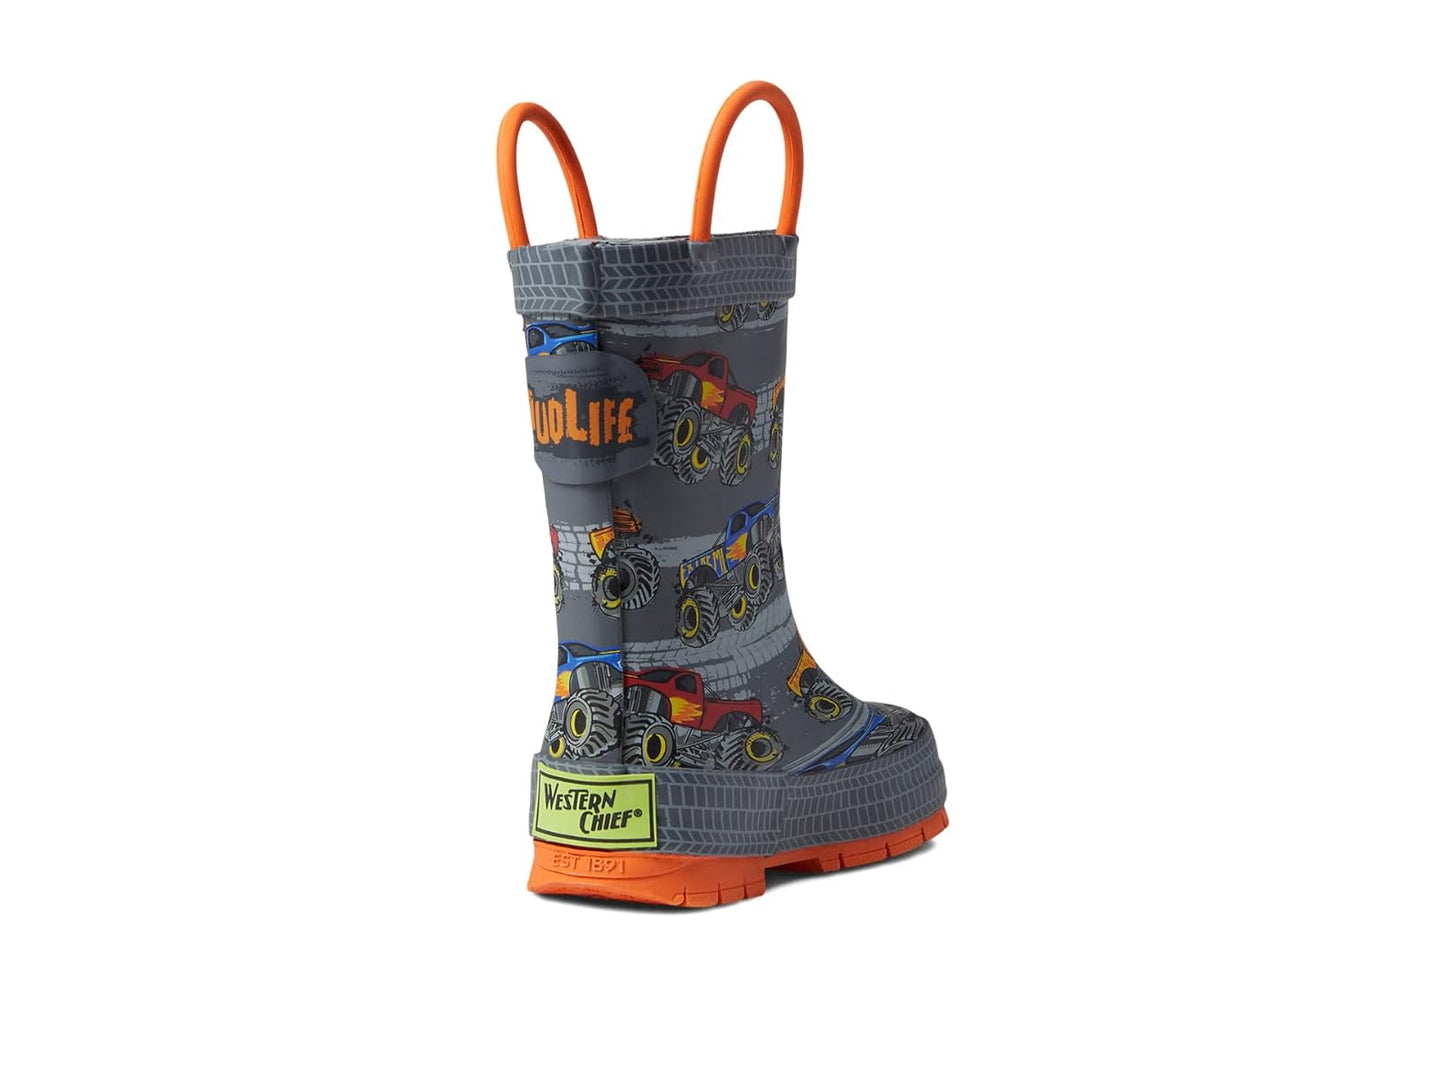 Western Chief Kids Mud Life Boots